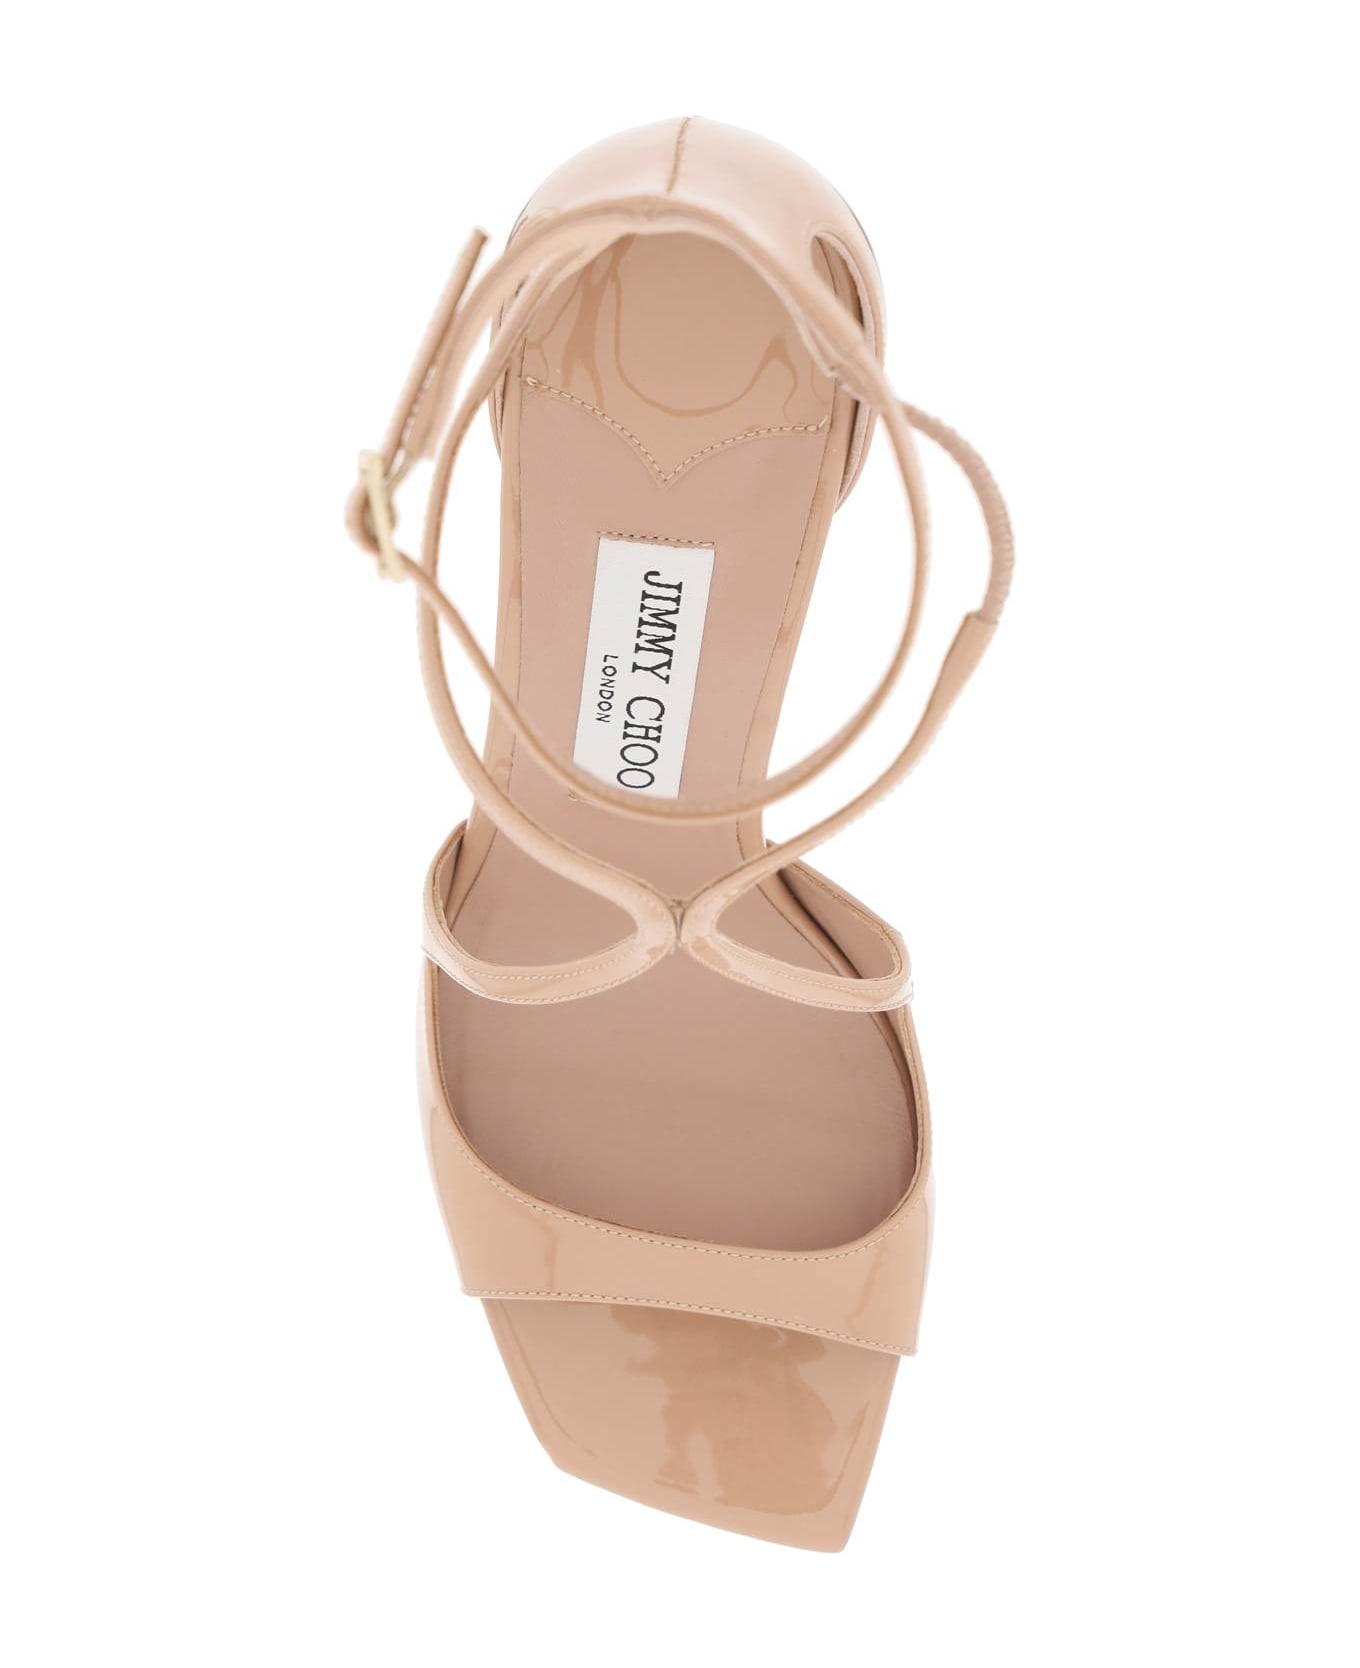 Jimmy Choo Patent Leather Azia 95 Sandals - BALLET PINK (Pink)